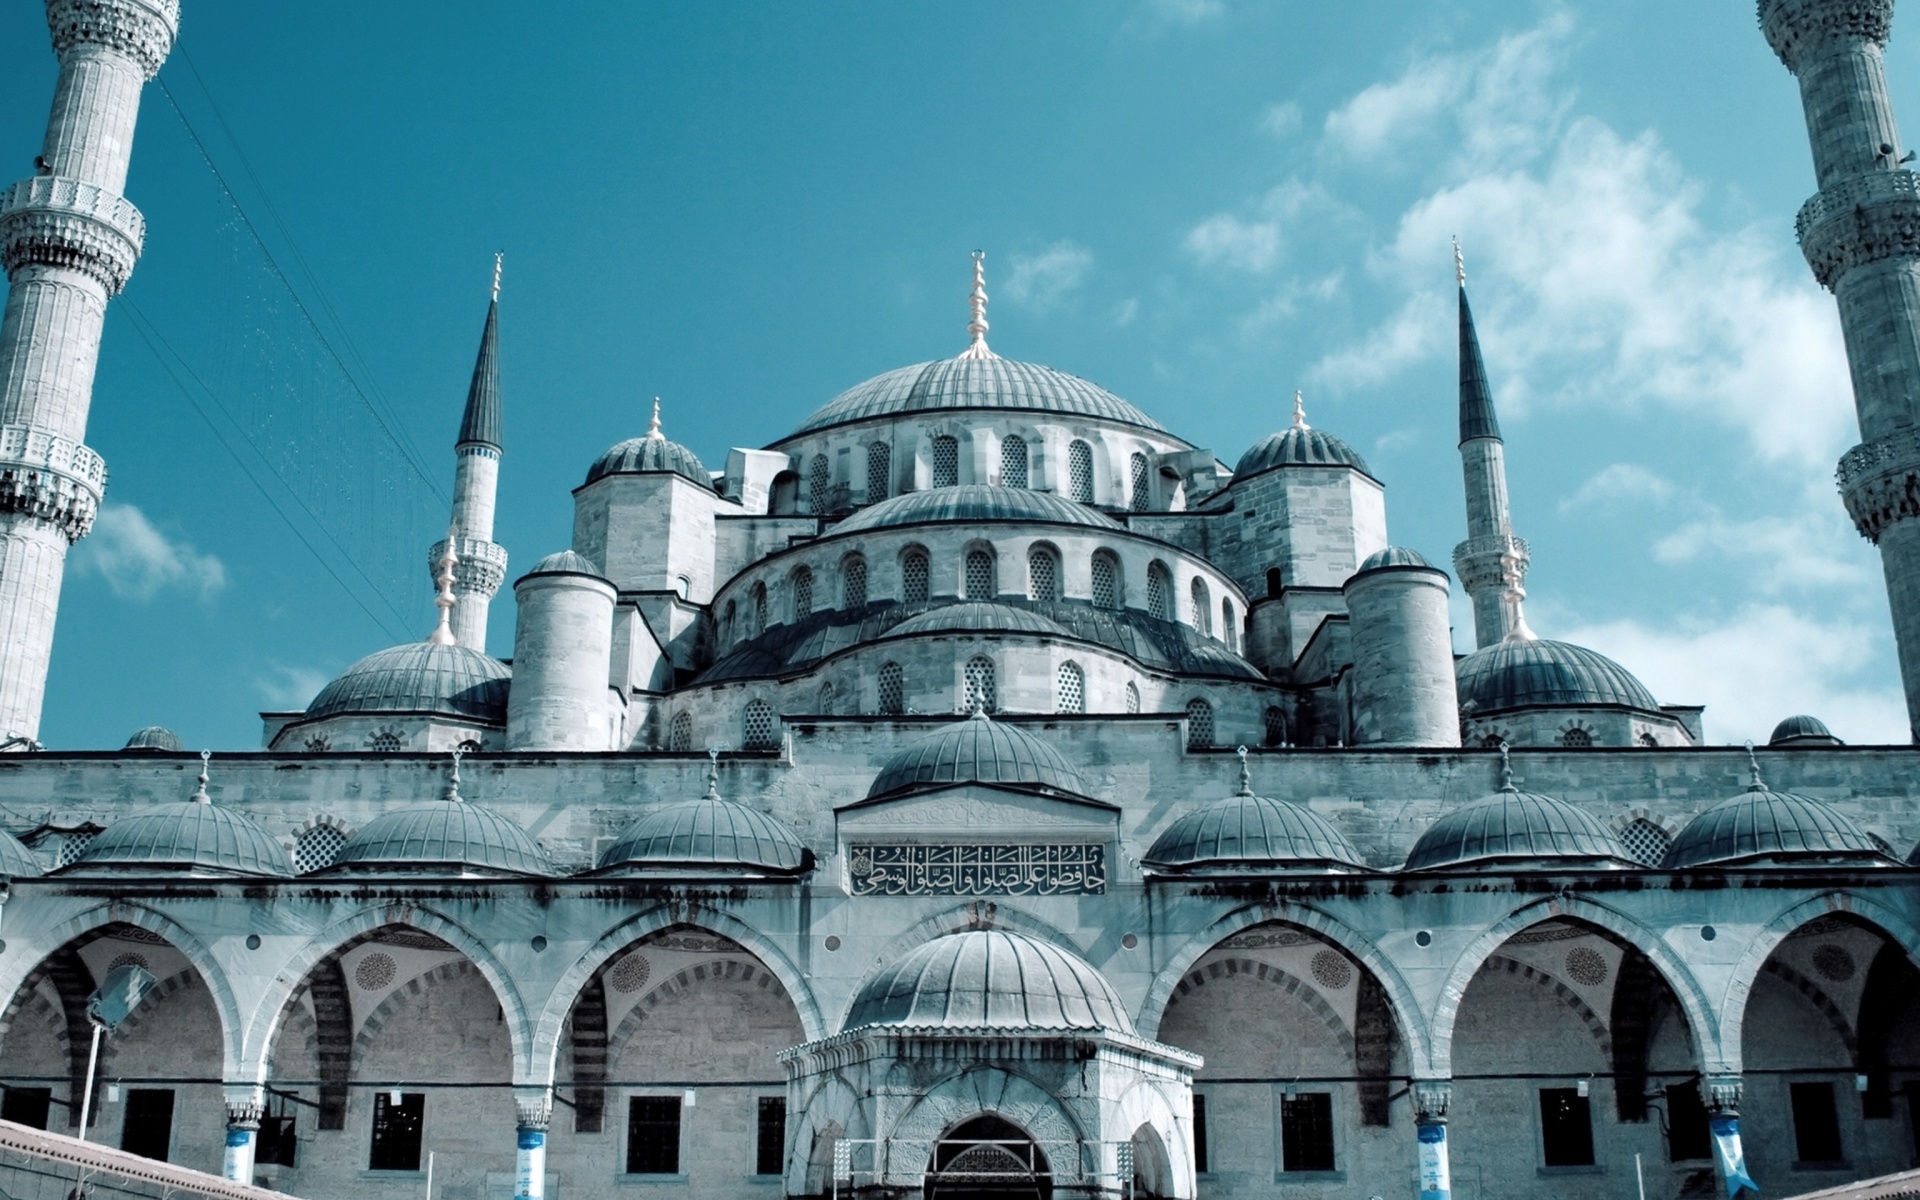 Sultan Ahmed Mosque in Istanbul screenshot #1 1920x1200